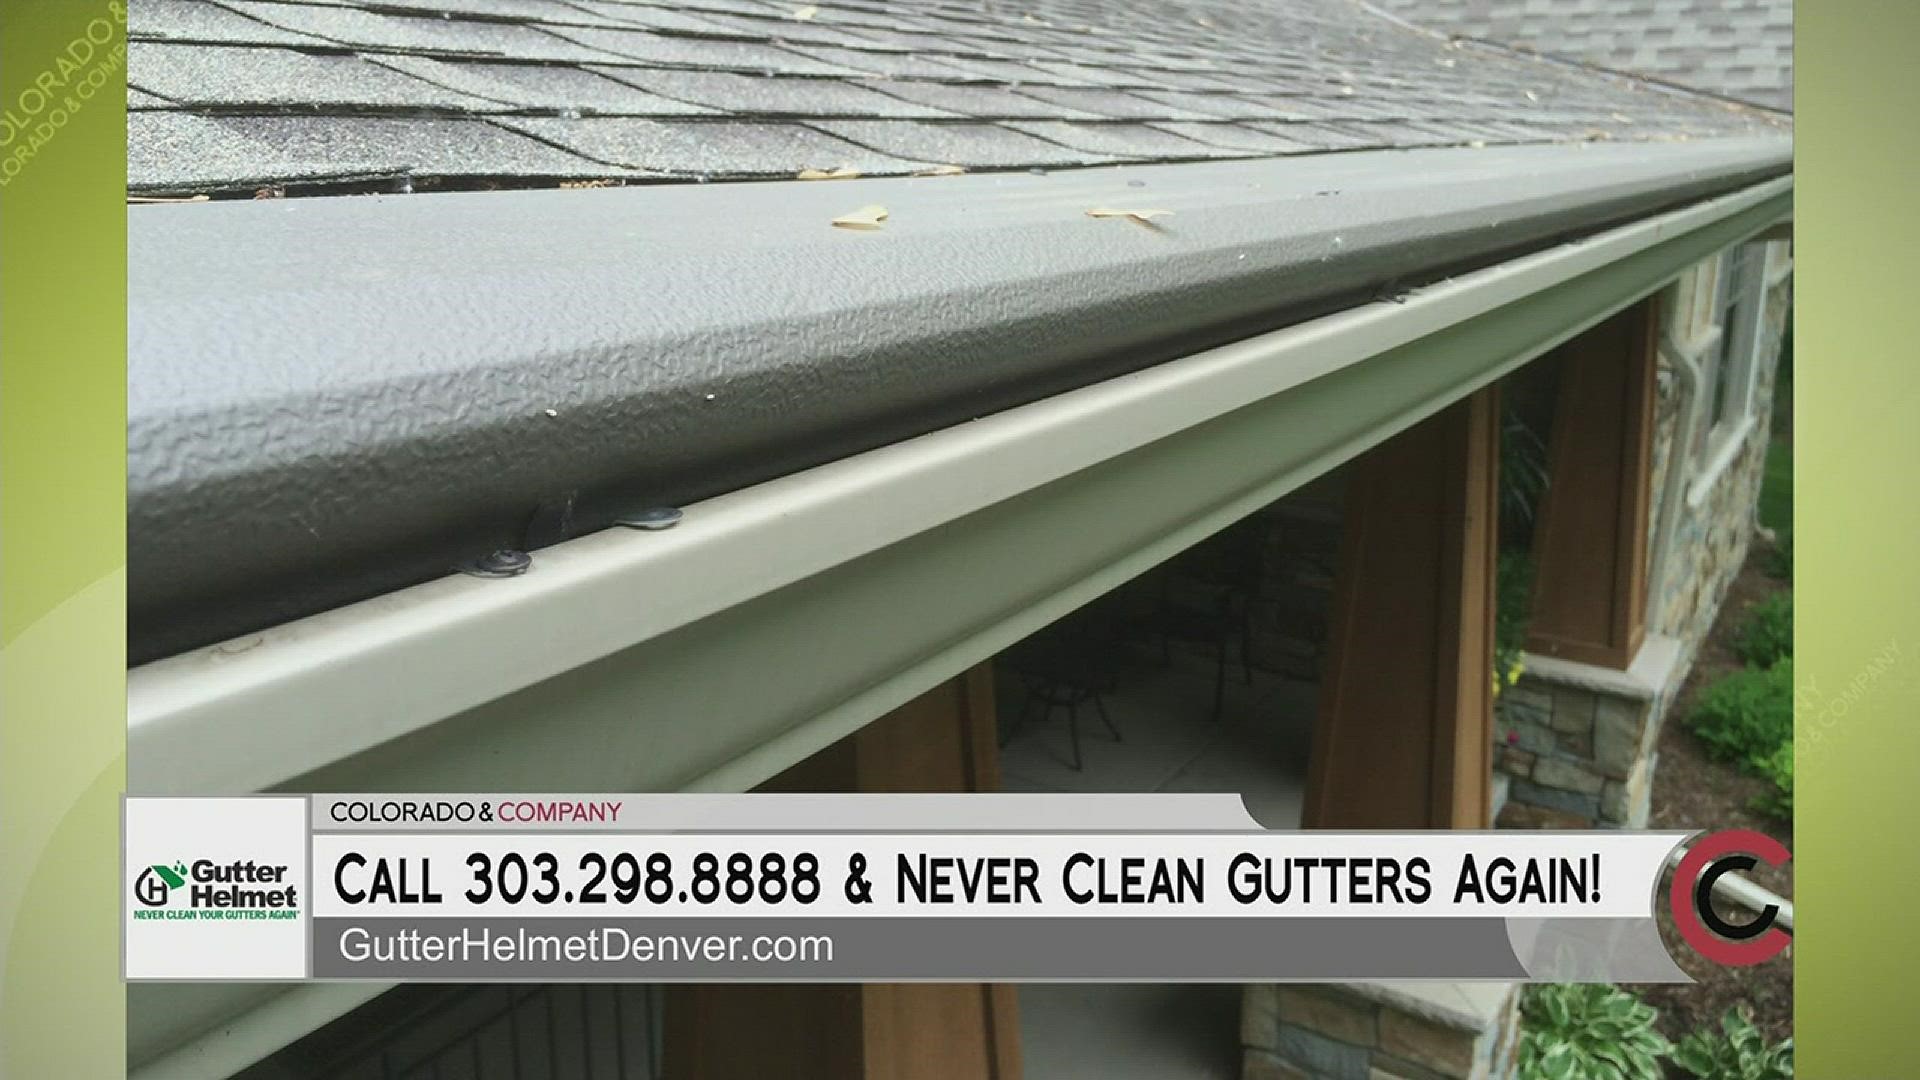 Never clean your gutters again! Gutter Helmet is offering CoCo viewers a great deal—up to 50% off, at the time of estimate only. Senior and military discounts are available, as well. Call 303.298.8888 or visit www.GutterHelmetDenver.com for more information. THIS INTERVIEW HAS COMMERCIAL CONTENT. PRODUCTS AND SERVICES FEATURED APPEAR AS PAID ADVERTISING.